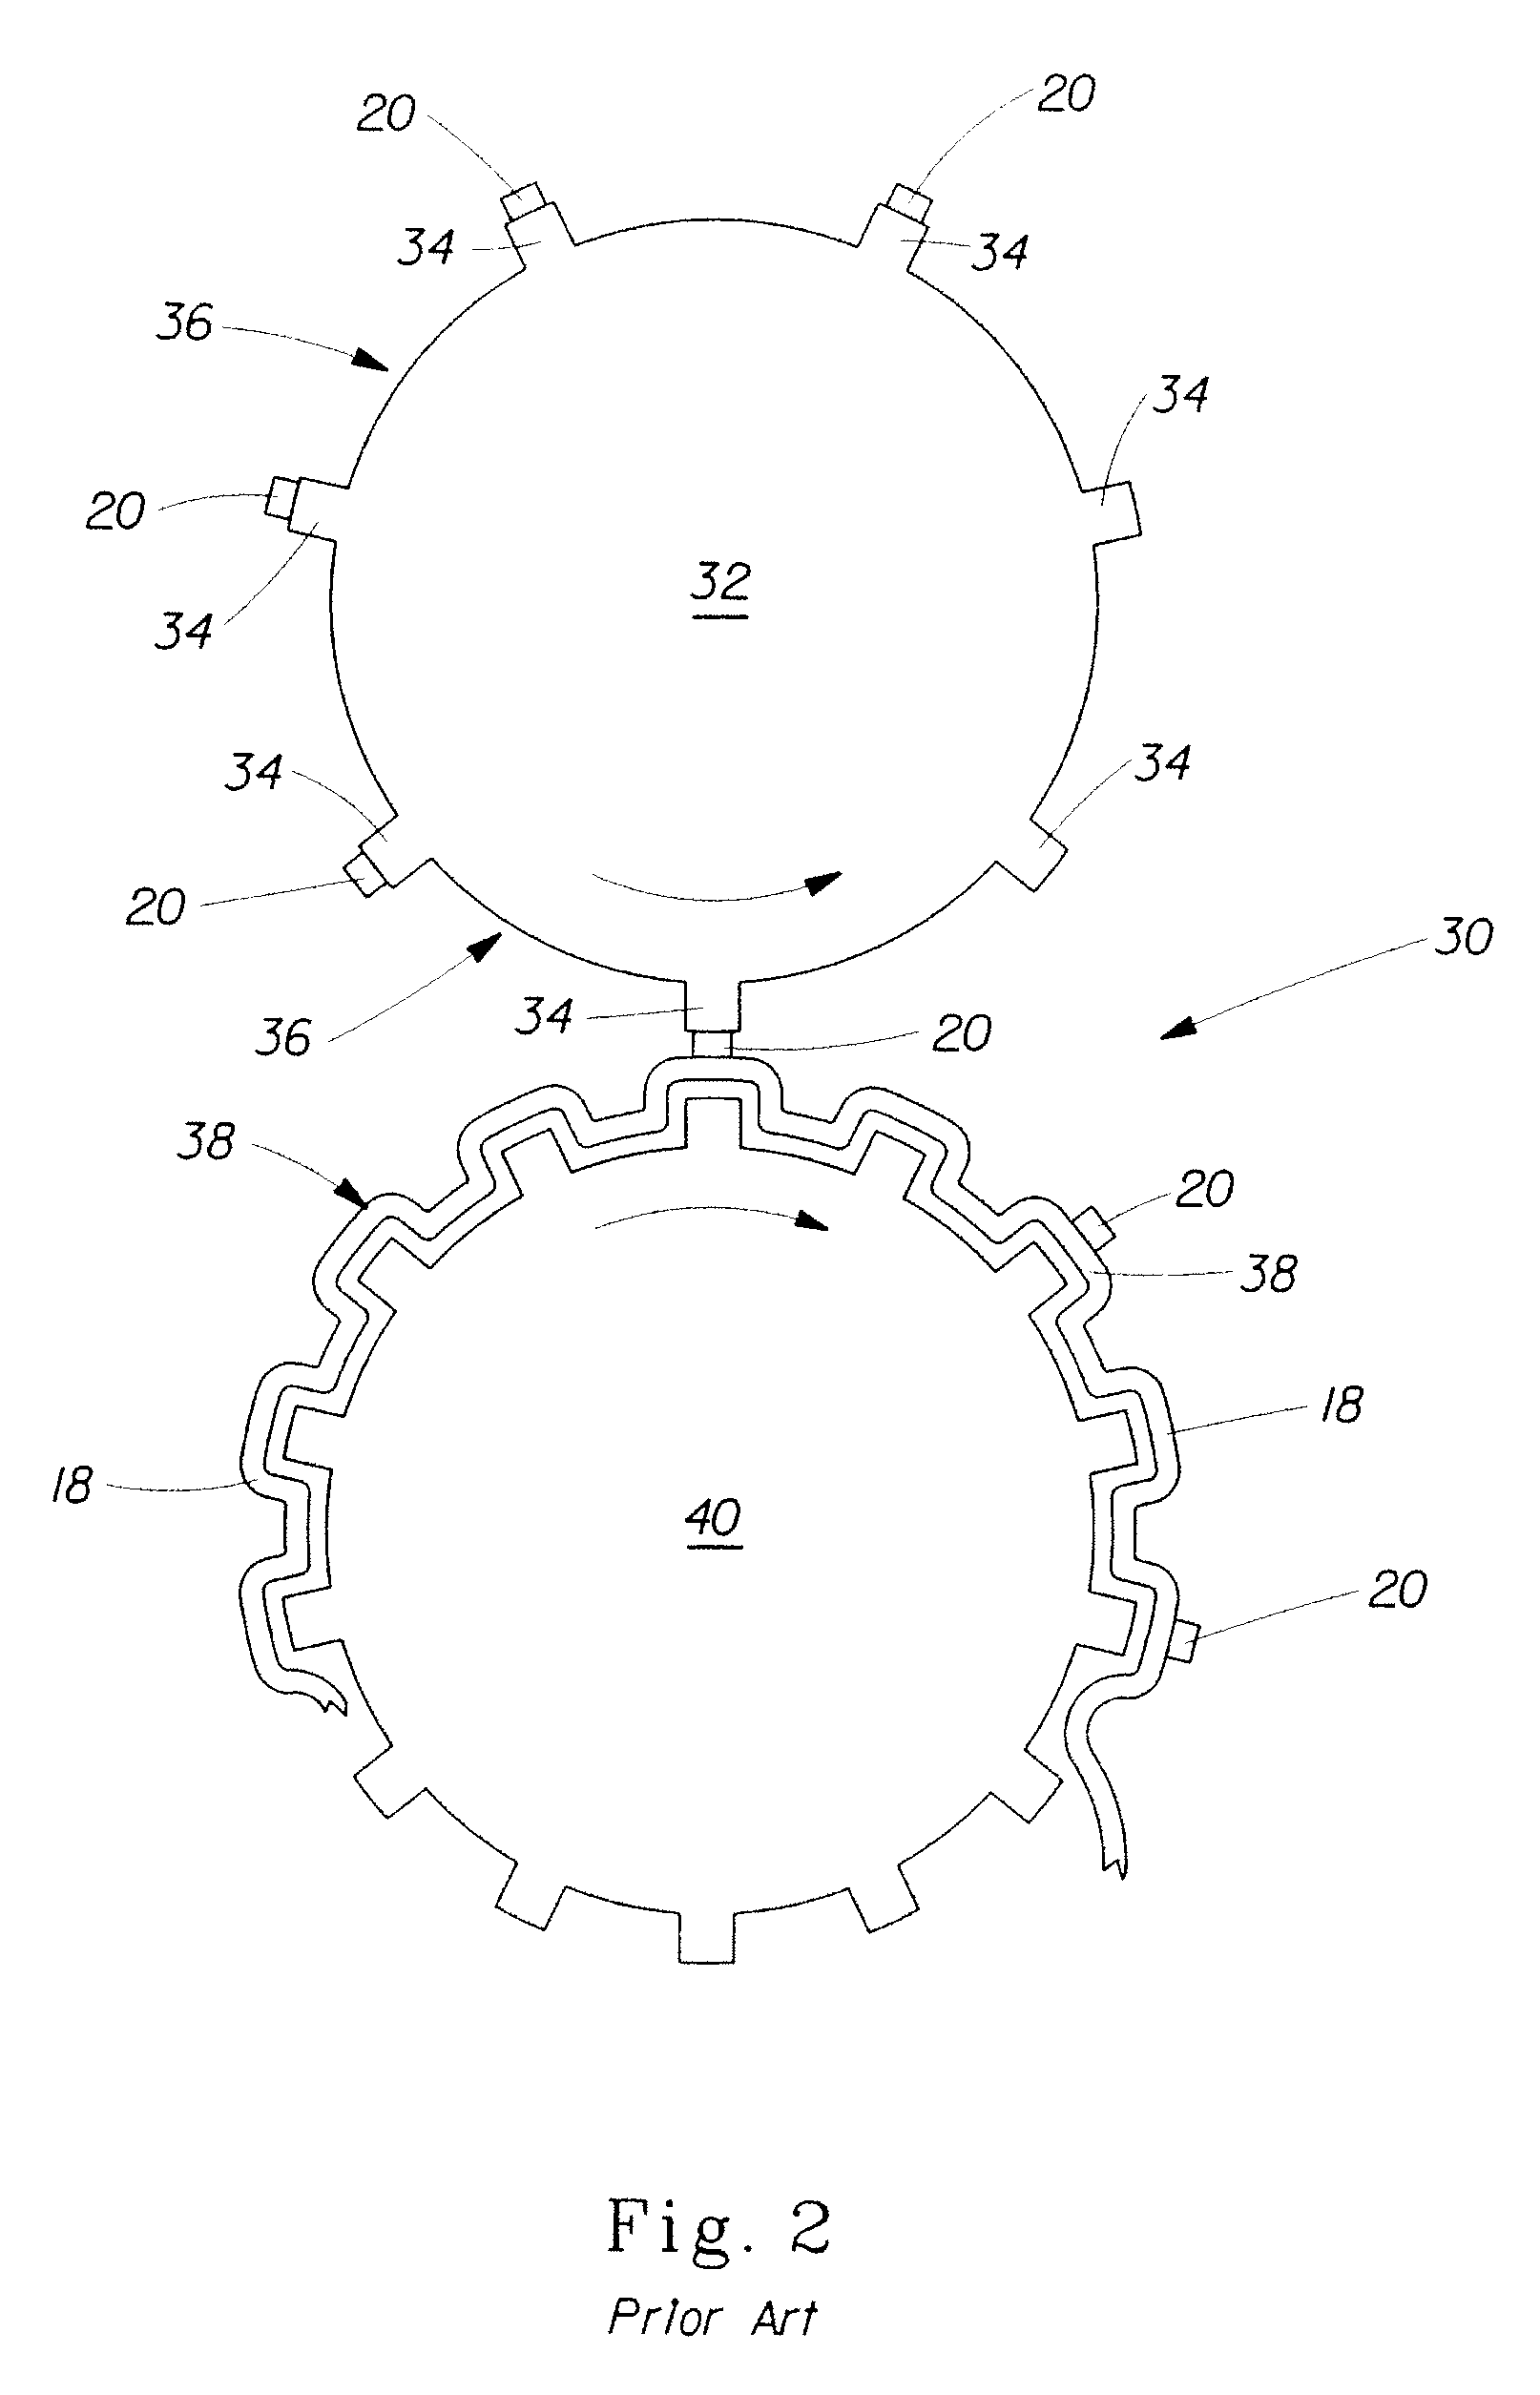 Multi-ply fibrous structures and processes for making same